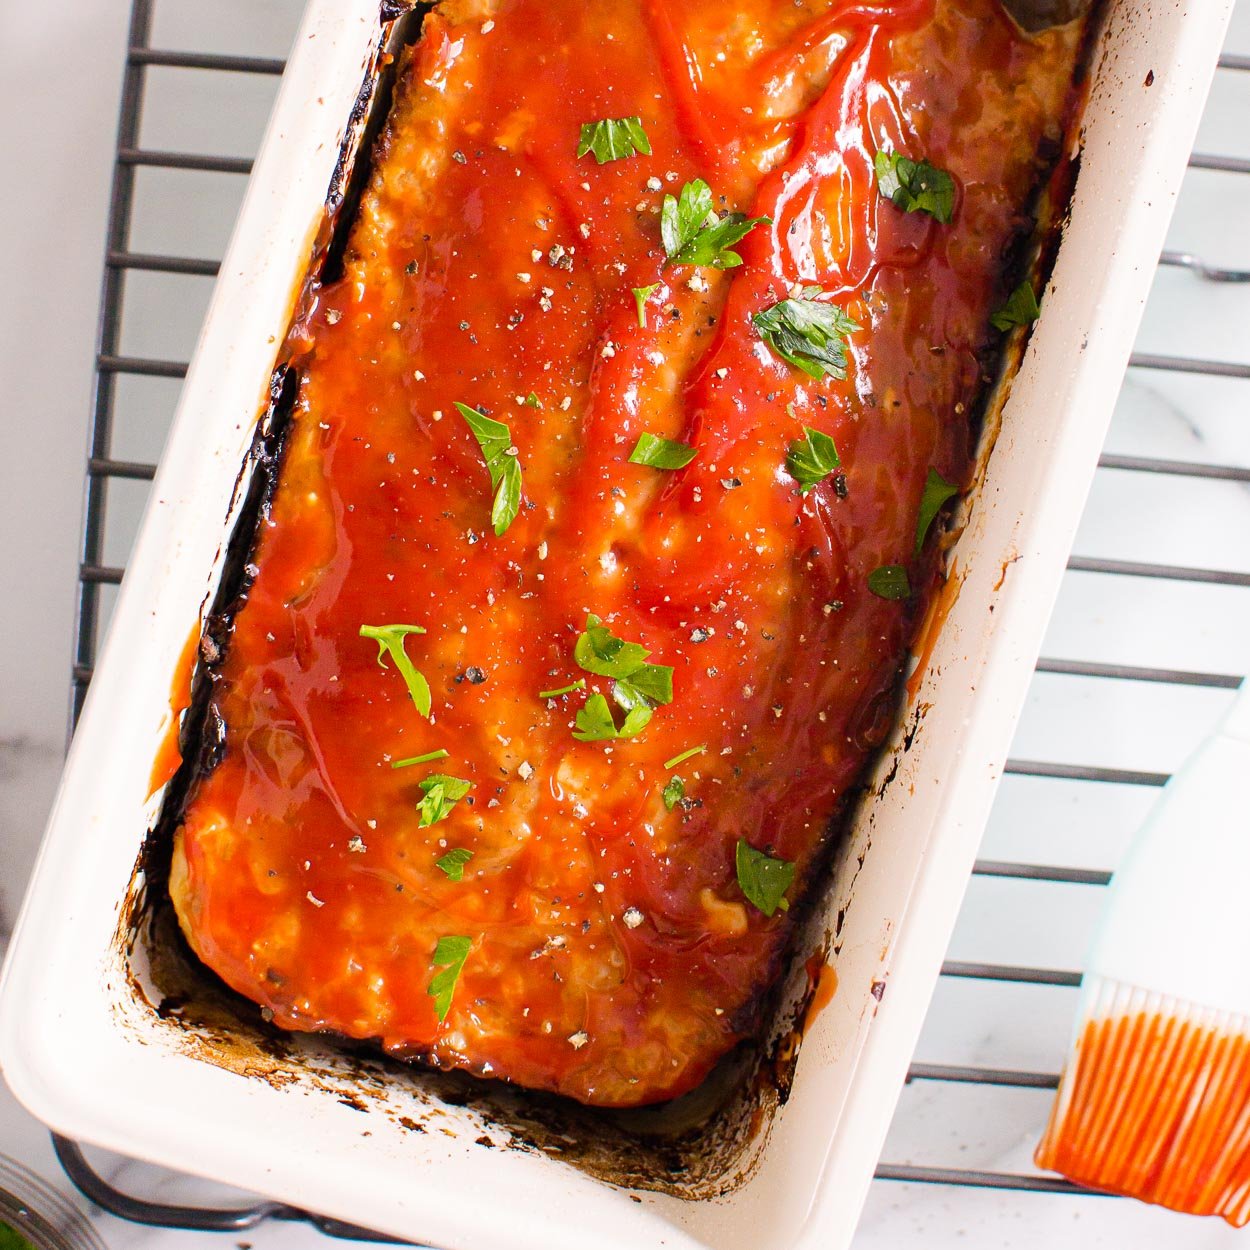 Classic Turkey Meatloaf - Cooked by Julie